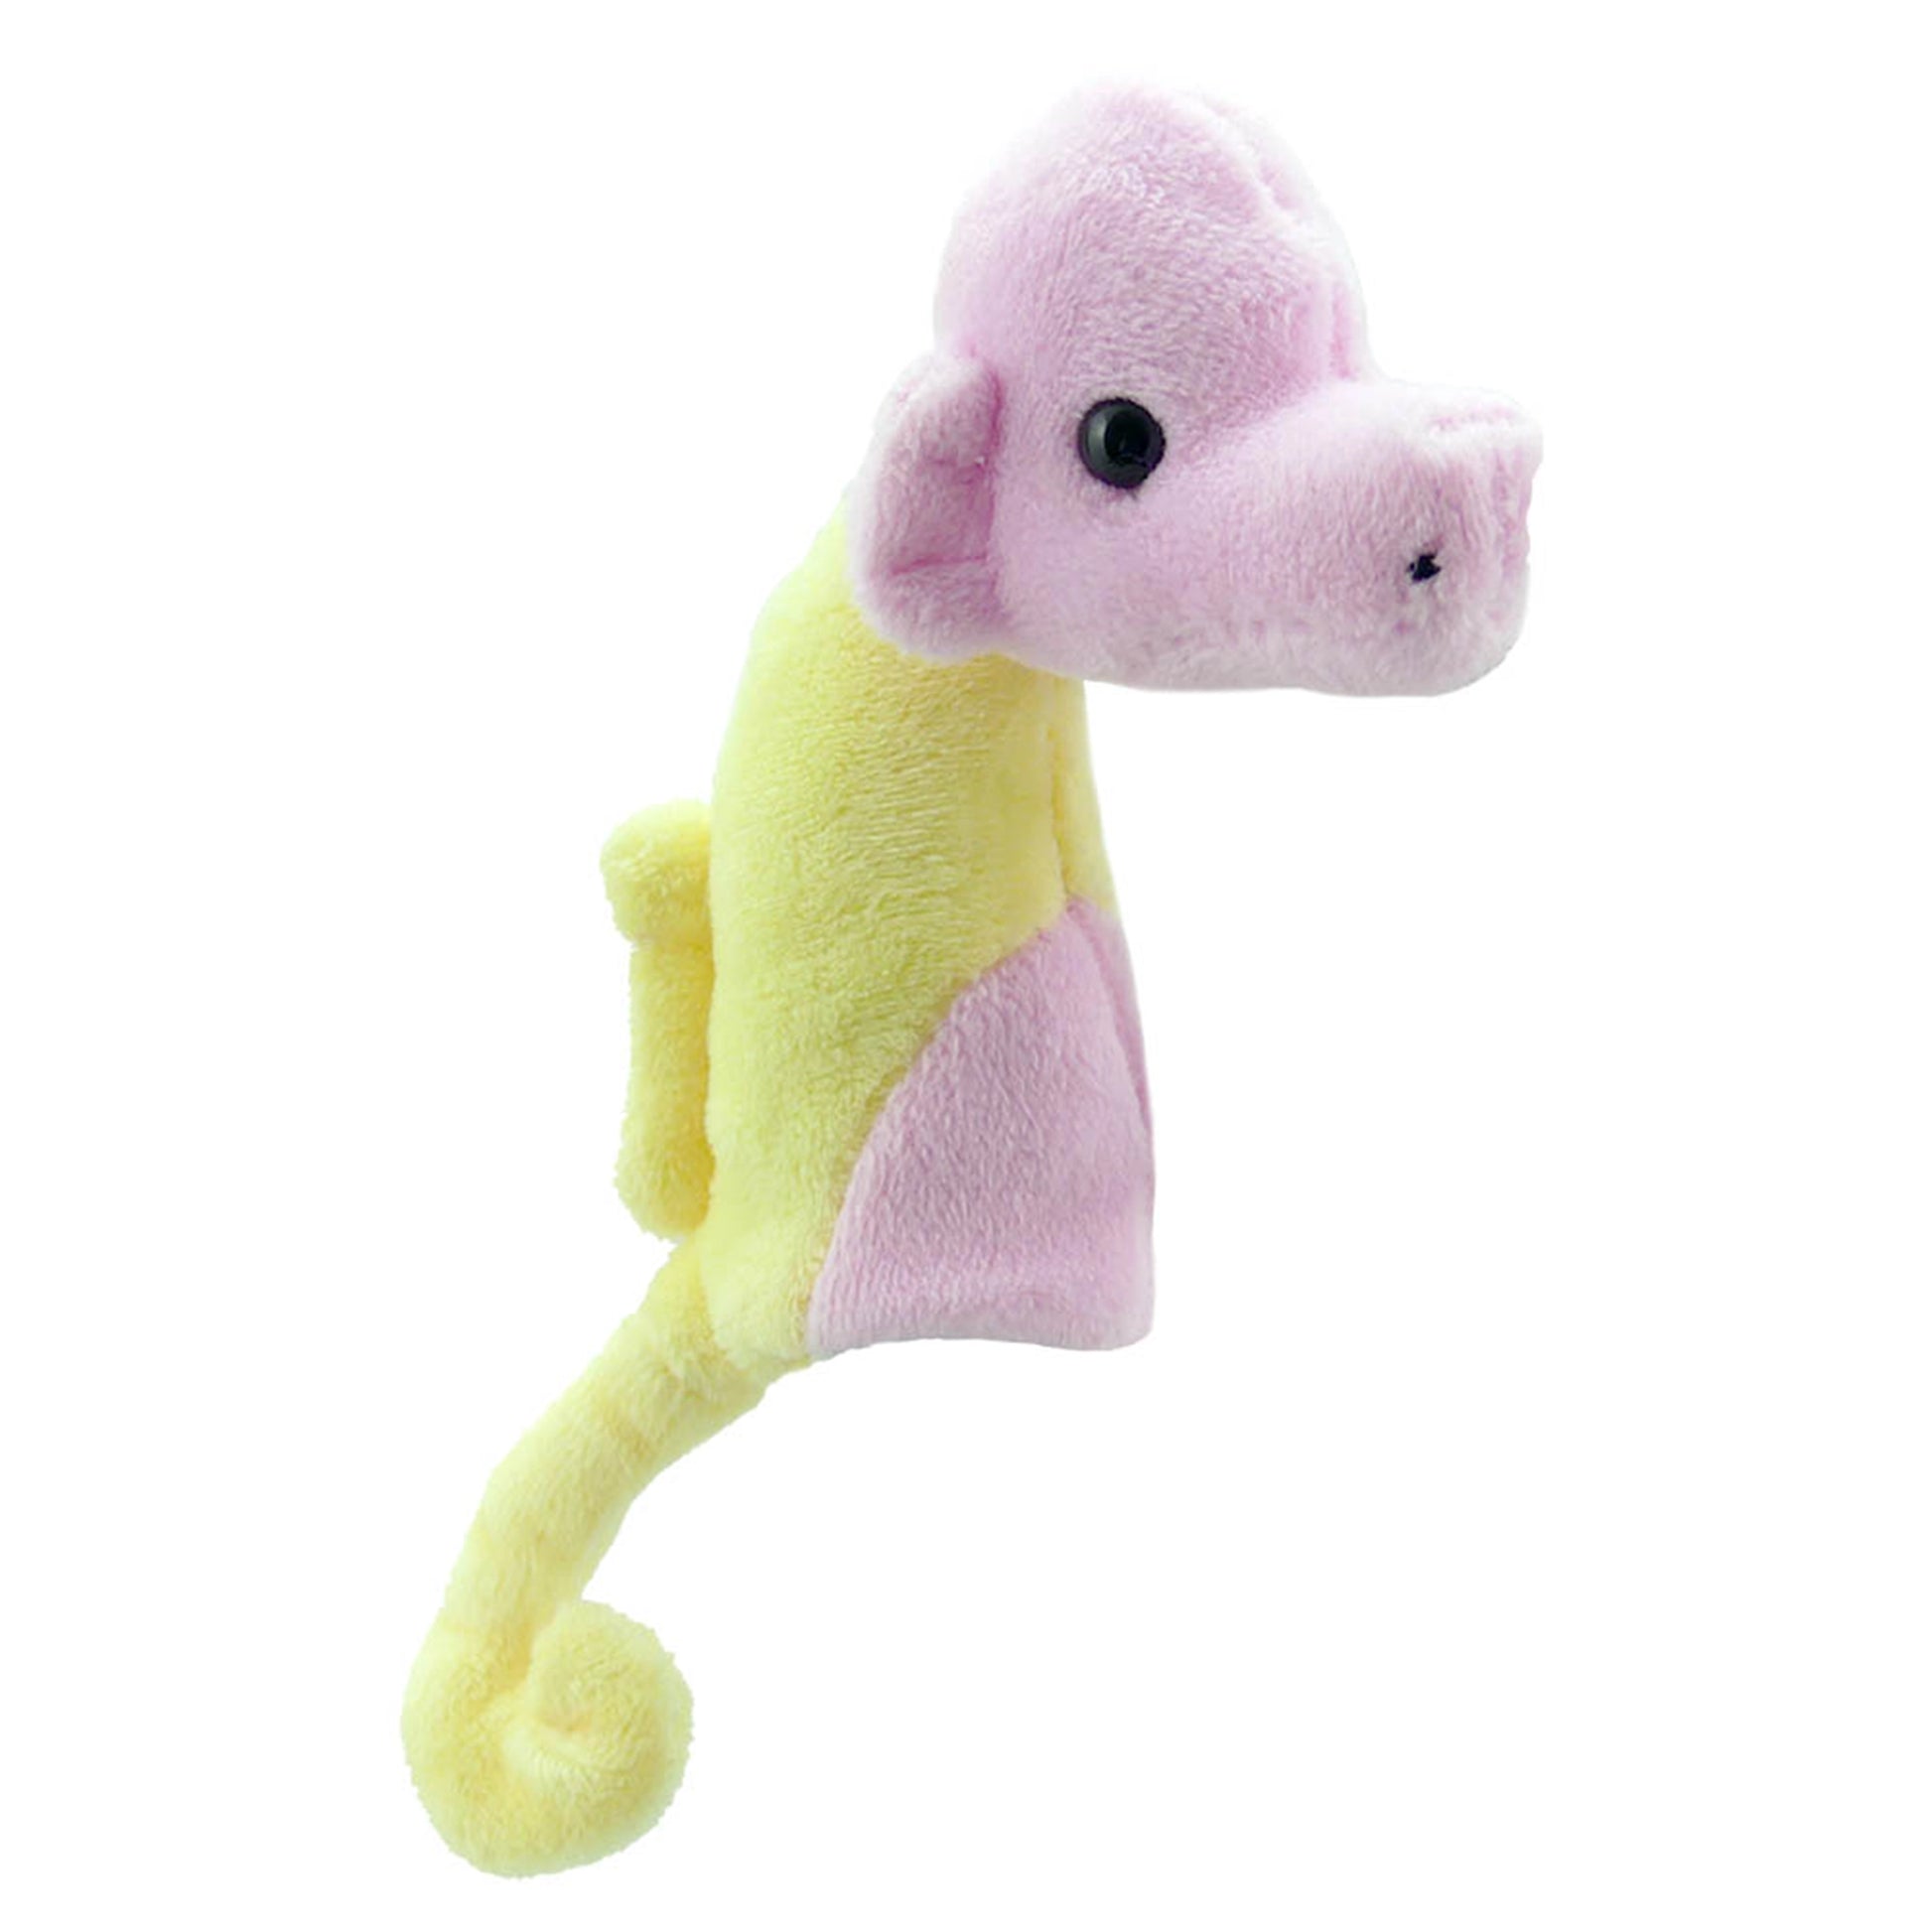 Seahorse Finger Puppet - The Puppet Company - The Forgotten Toy Shop